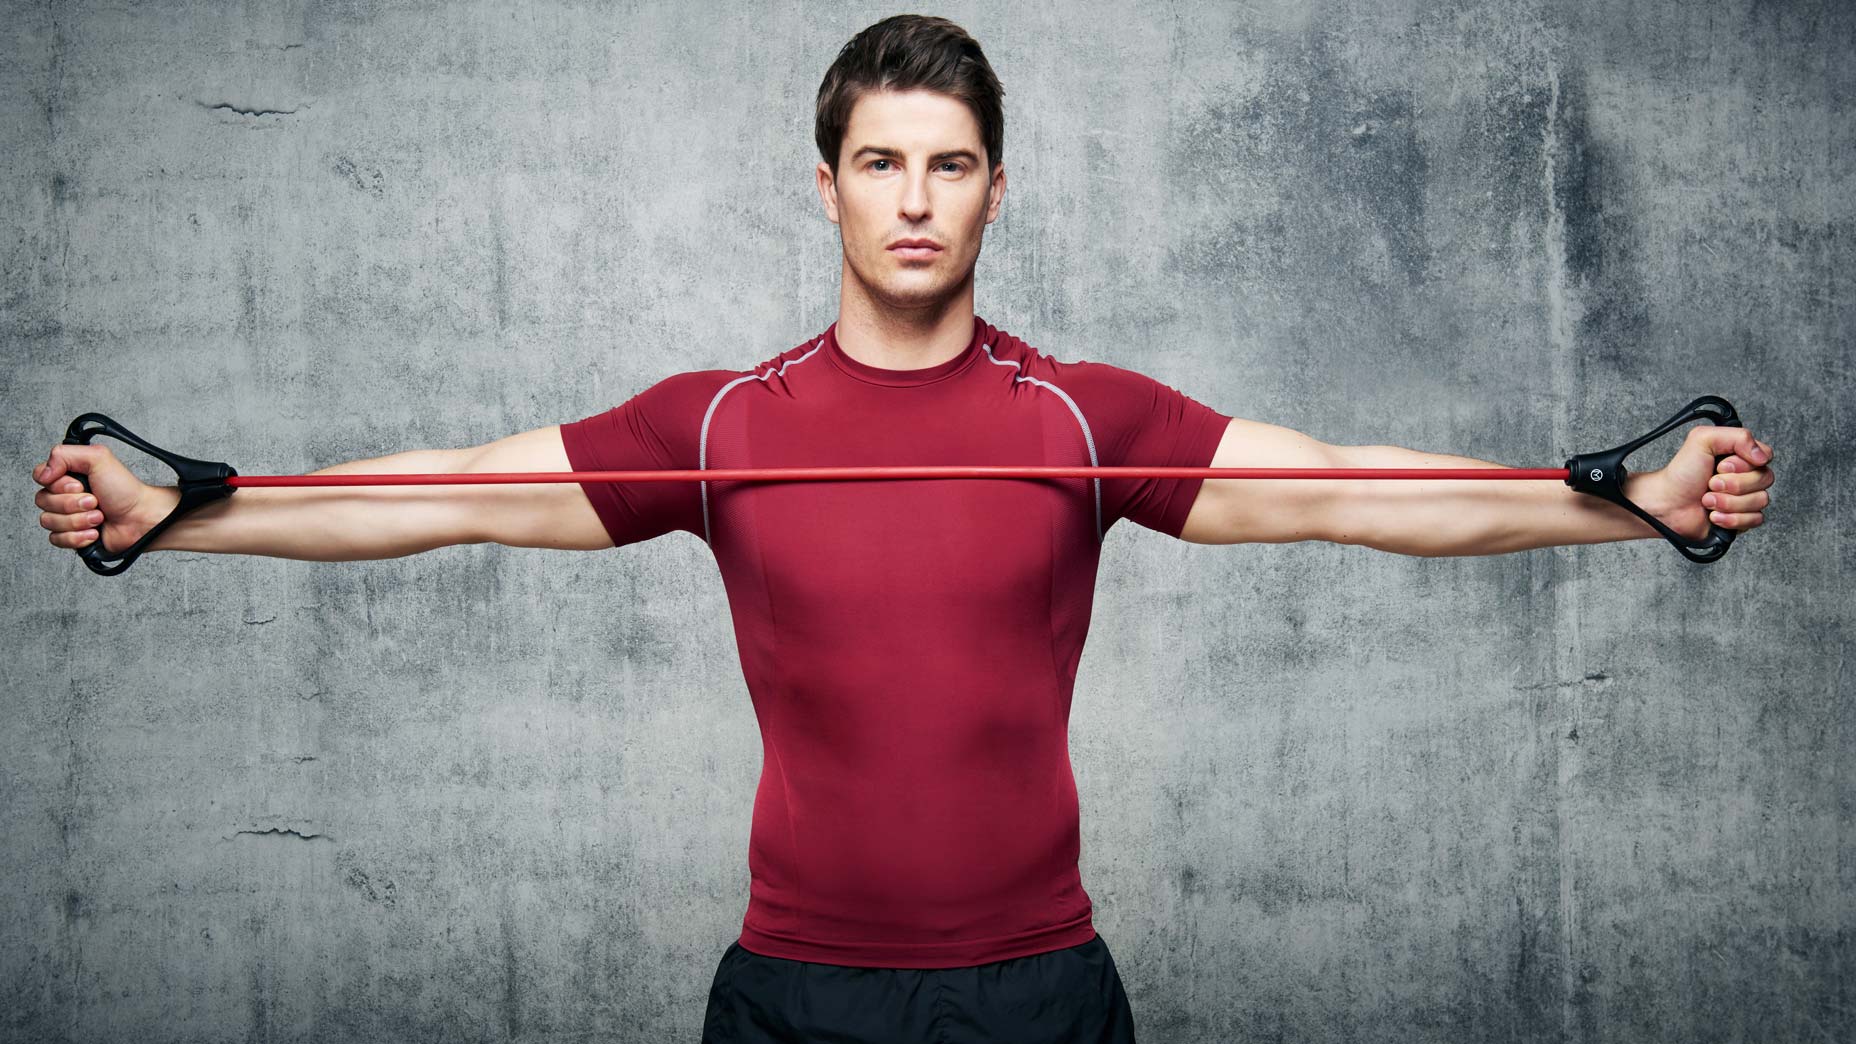 How Resistance Bands Improve Your Workout